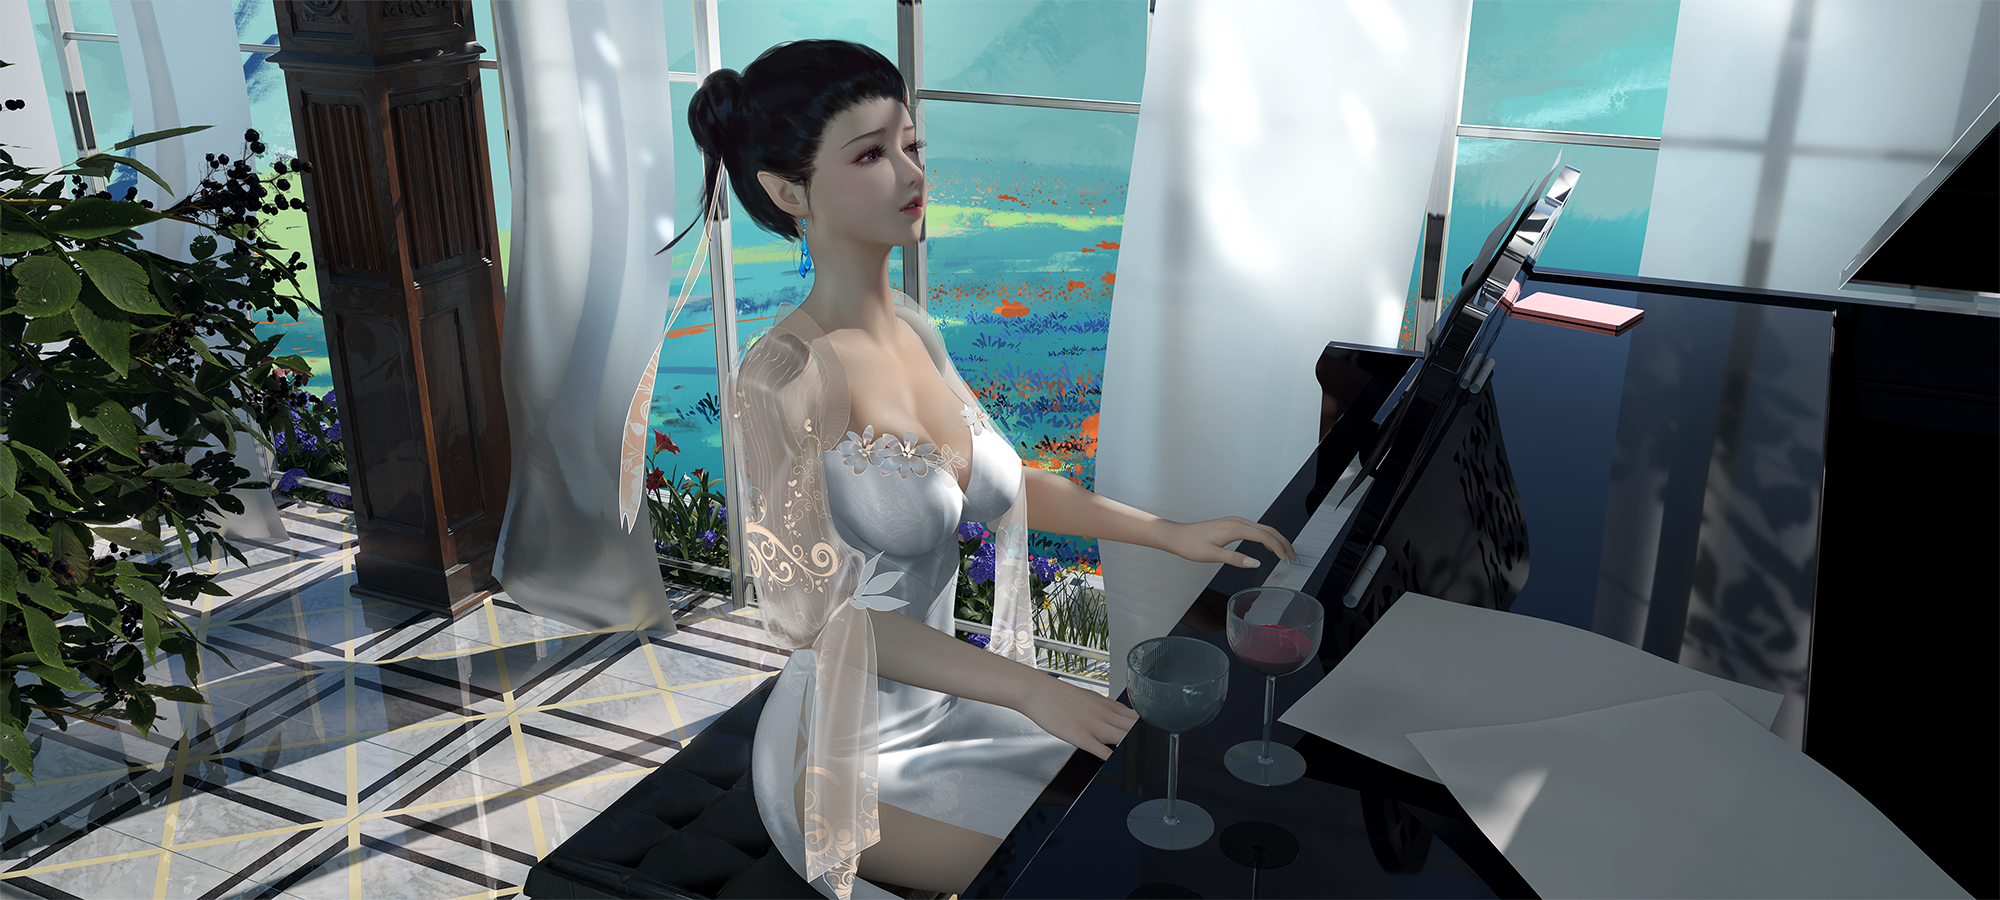 General 2000x900 original characters 2D artwork drawing Ydiya Kai piano fantasy girl pointy ears musical instrument sitting leaves window glass drink wine glass paper curtains reflection hairbun earring